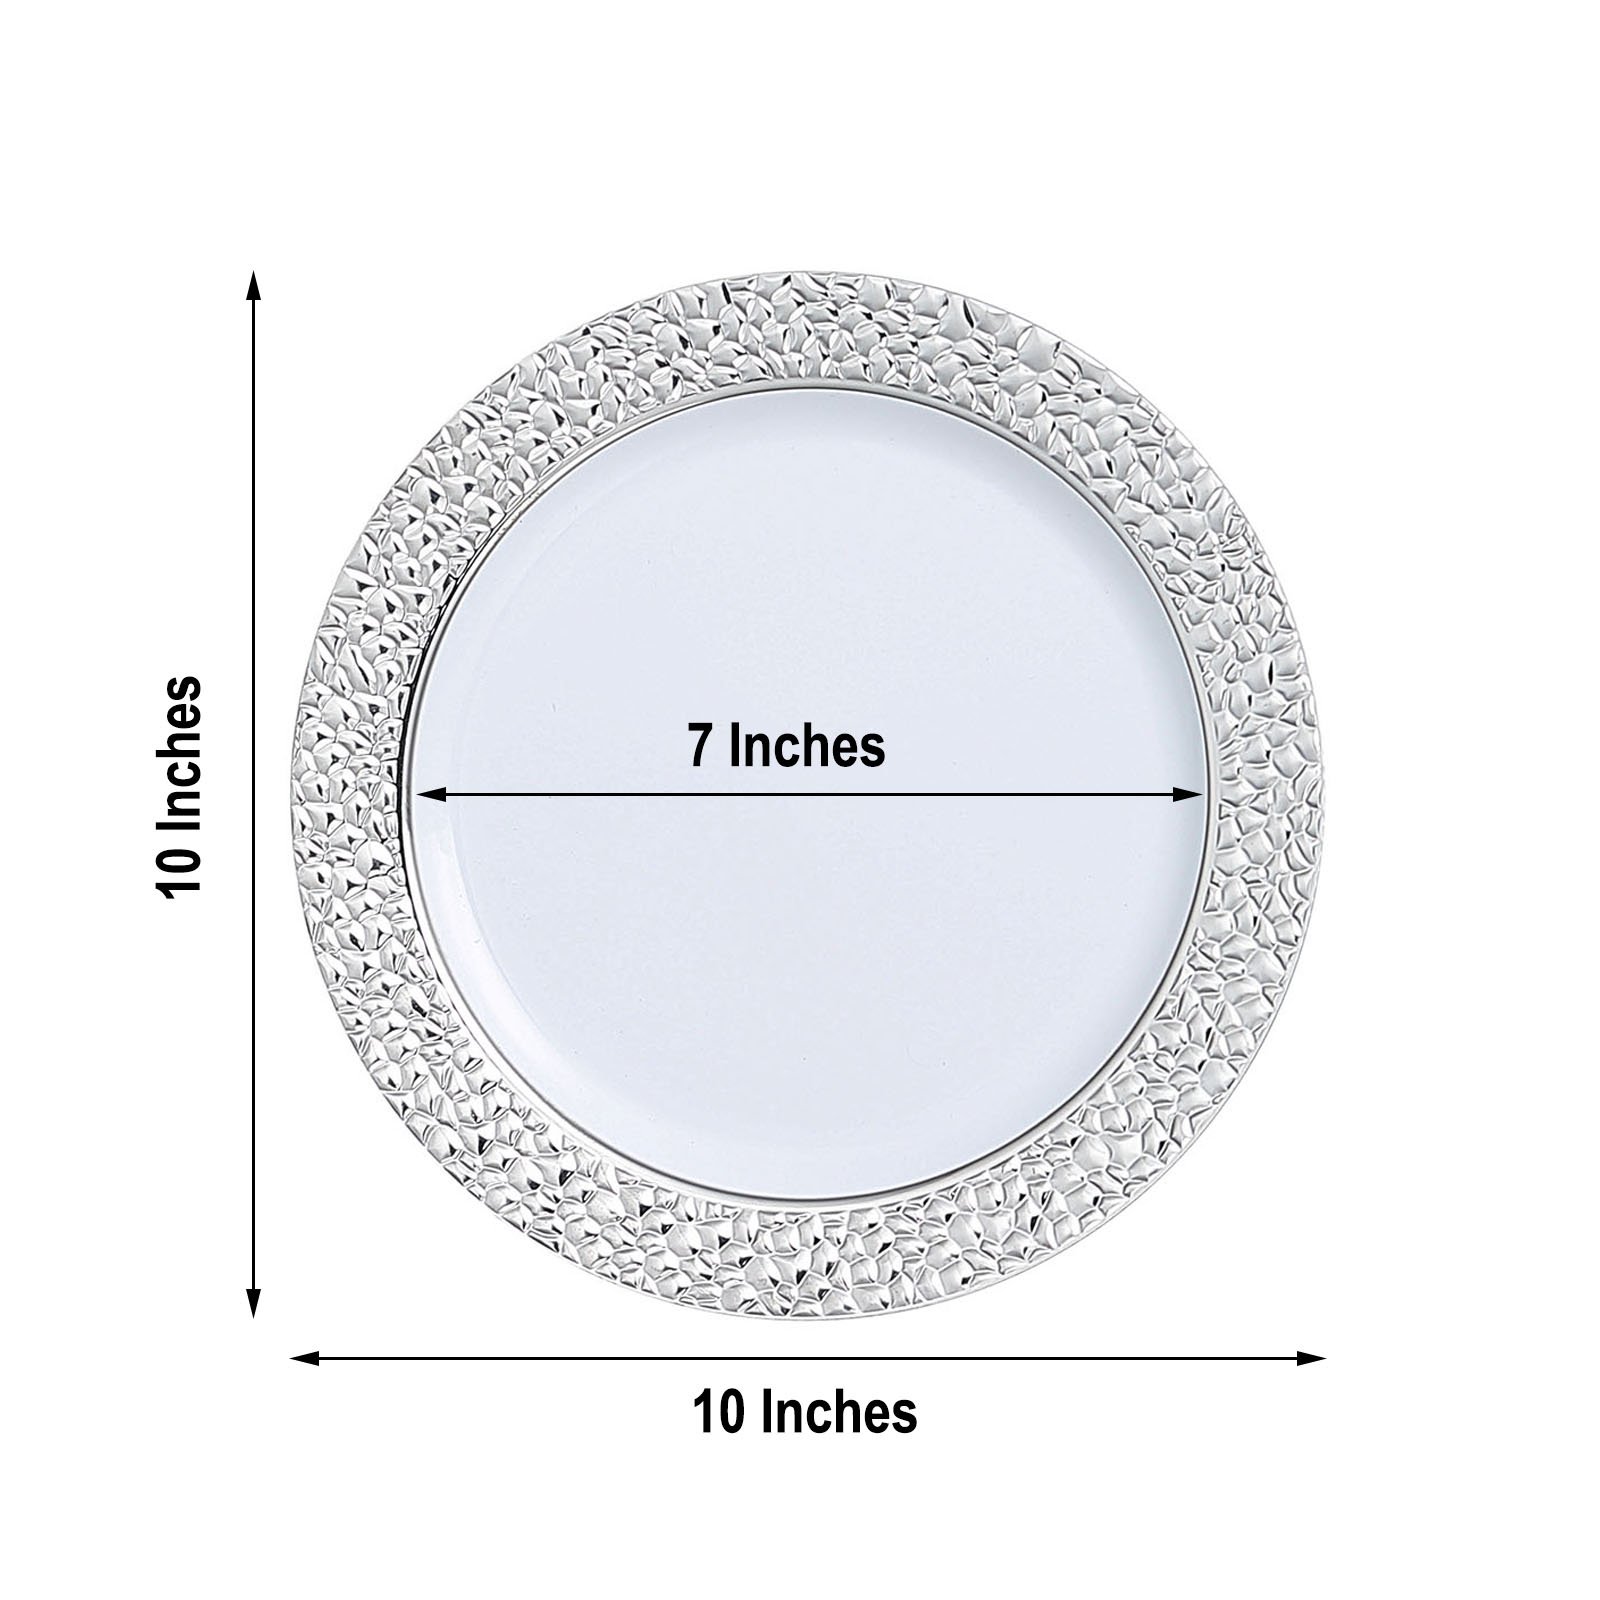 BalsaCircle 10 White 10" Round Plastic Salad Plates Silver Hammered Trim Disposable Tableware - image 5 of 6